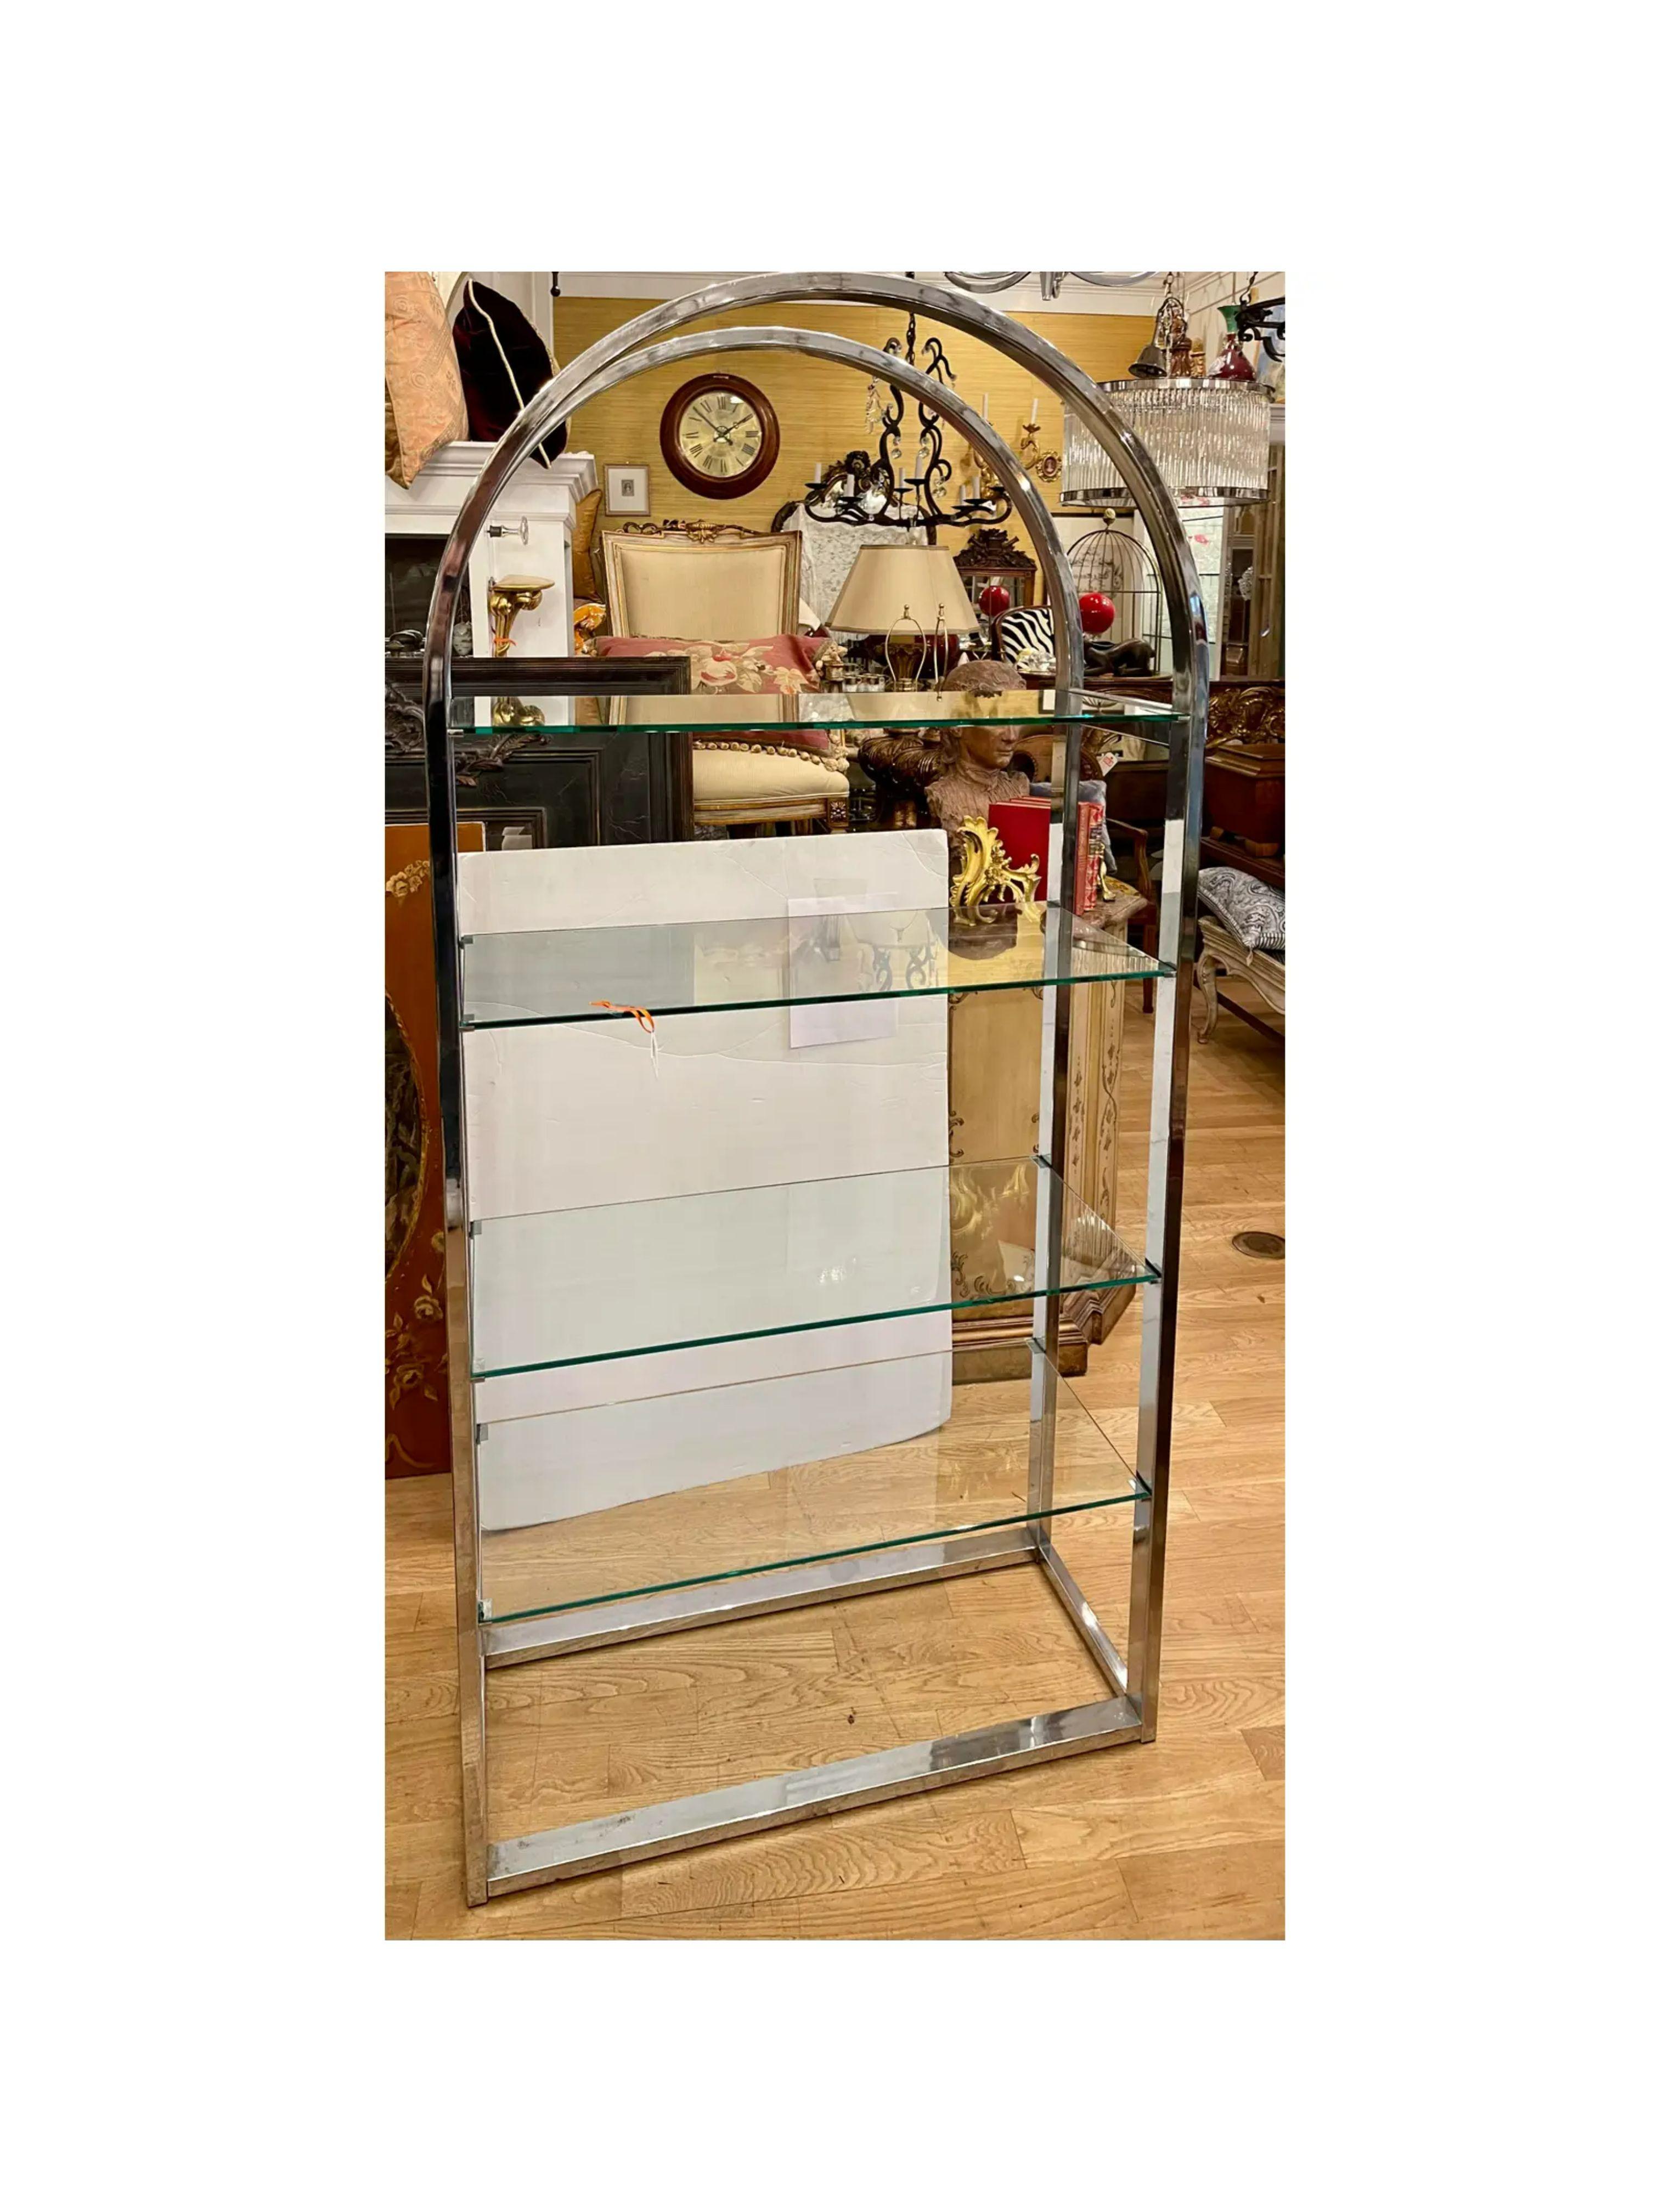 Modern Chrome & Glass Arched Etagere Display Shelving Unit, Mid-20th Century For Sale 2